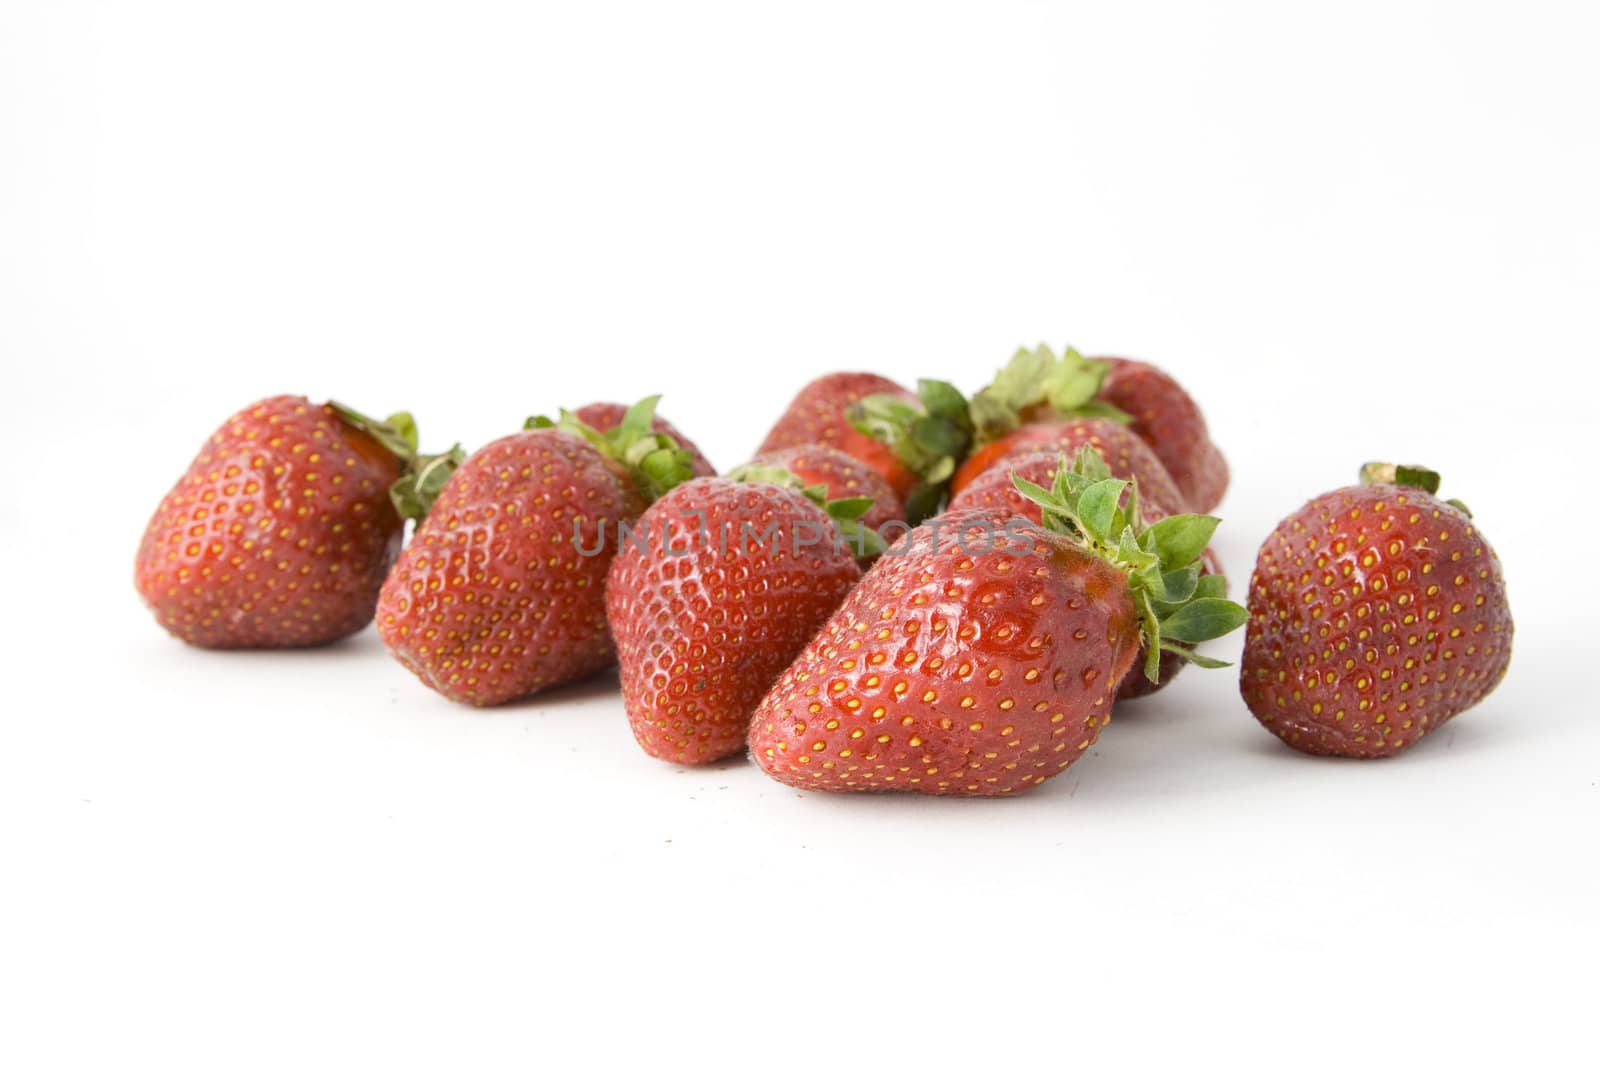 strawberries isolated